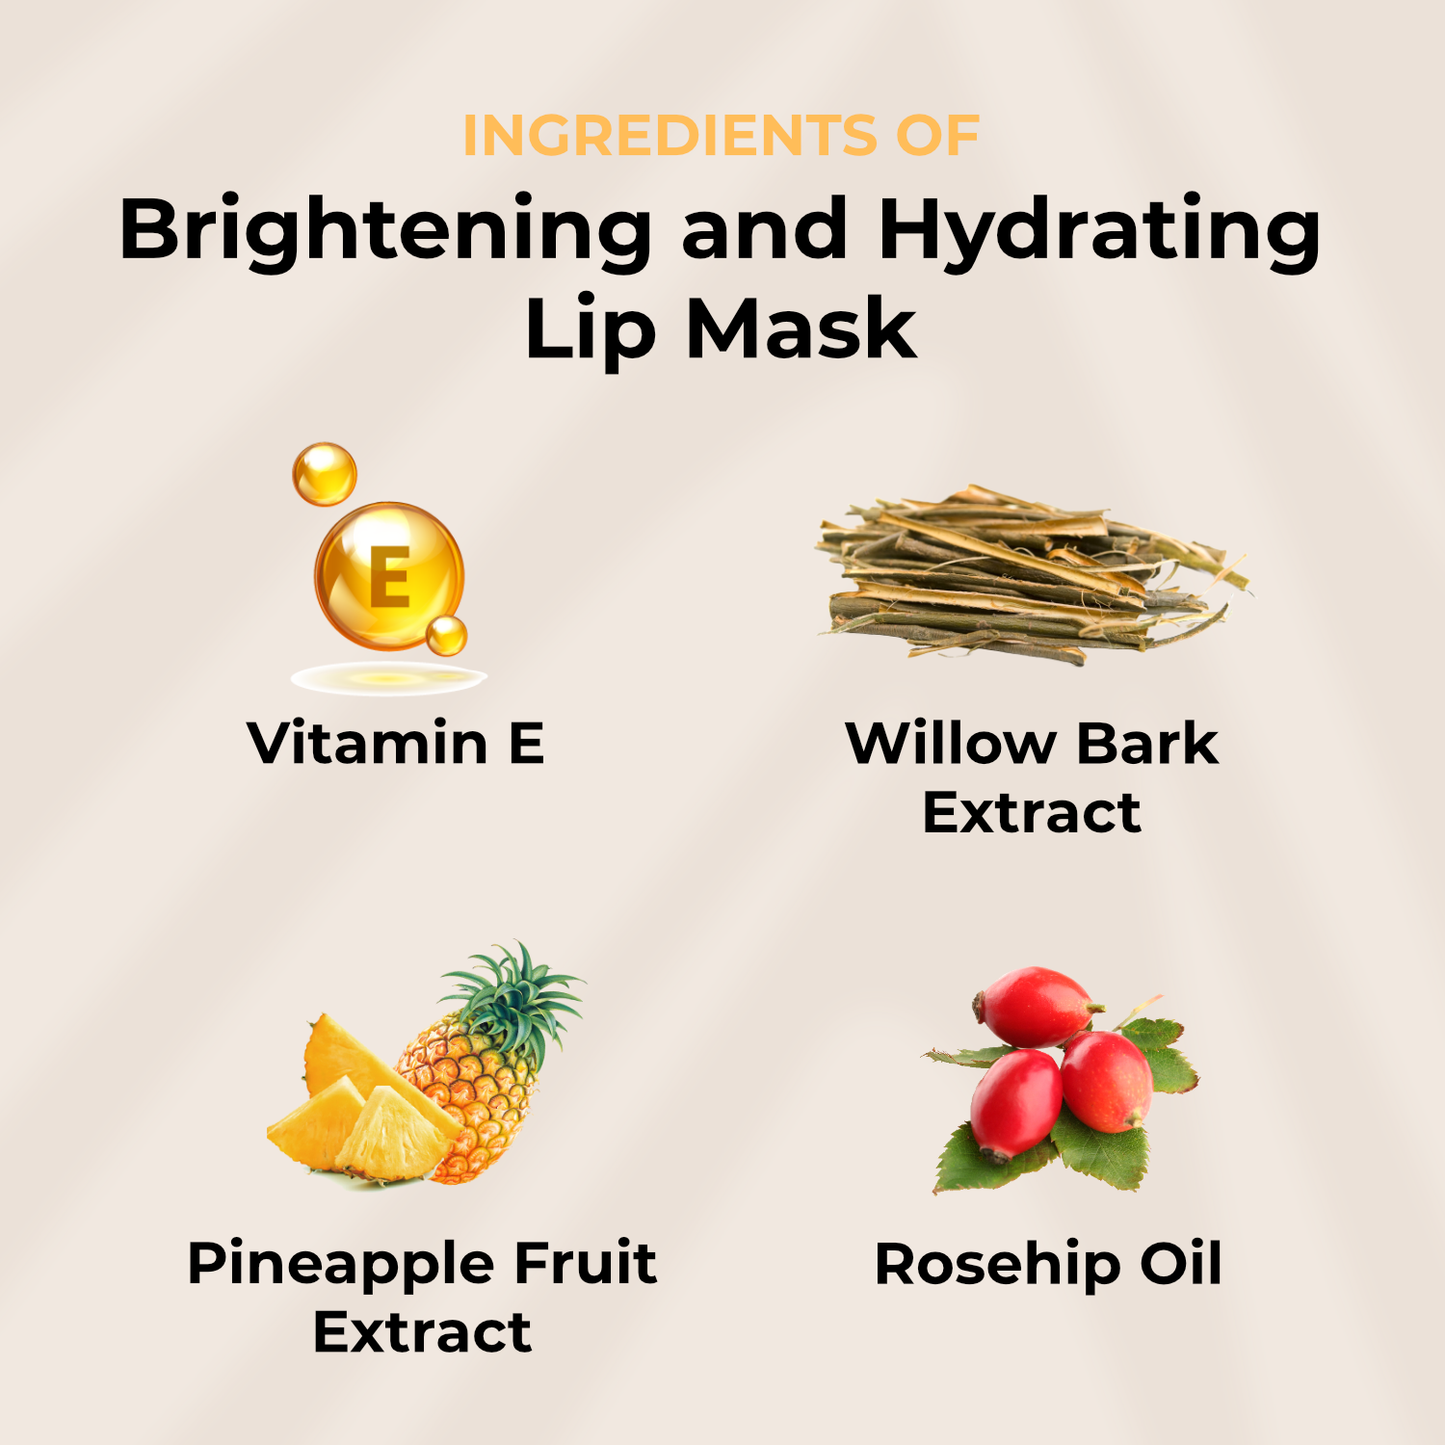 Brightening and Hydrating Lip Mask